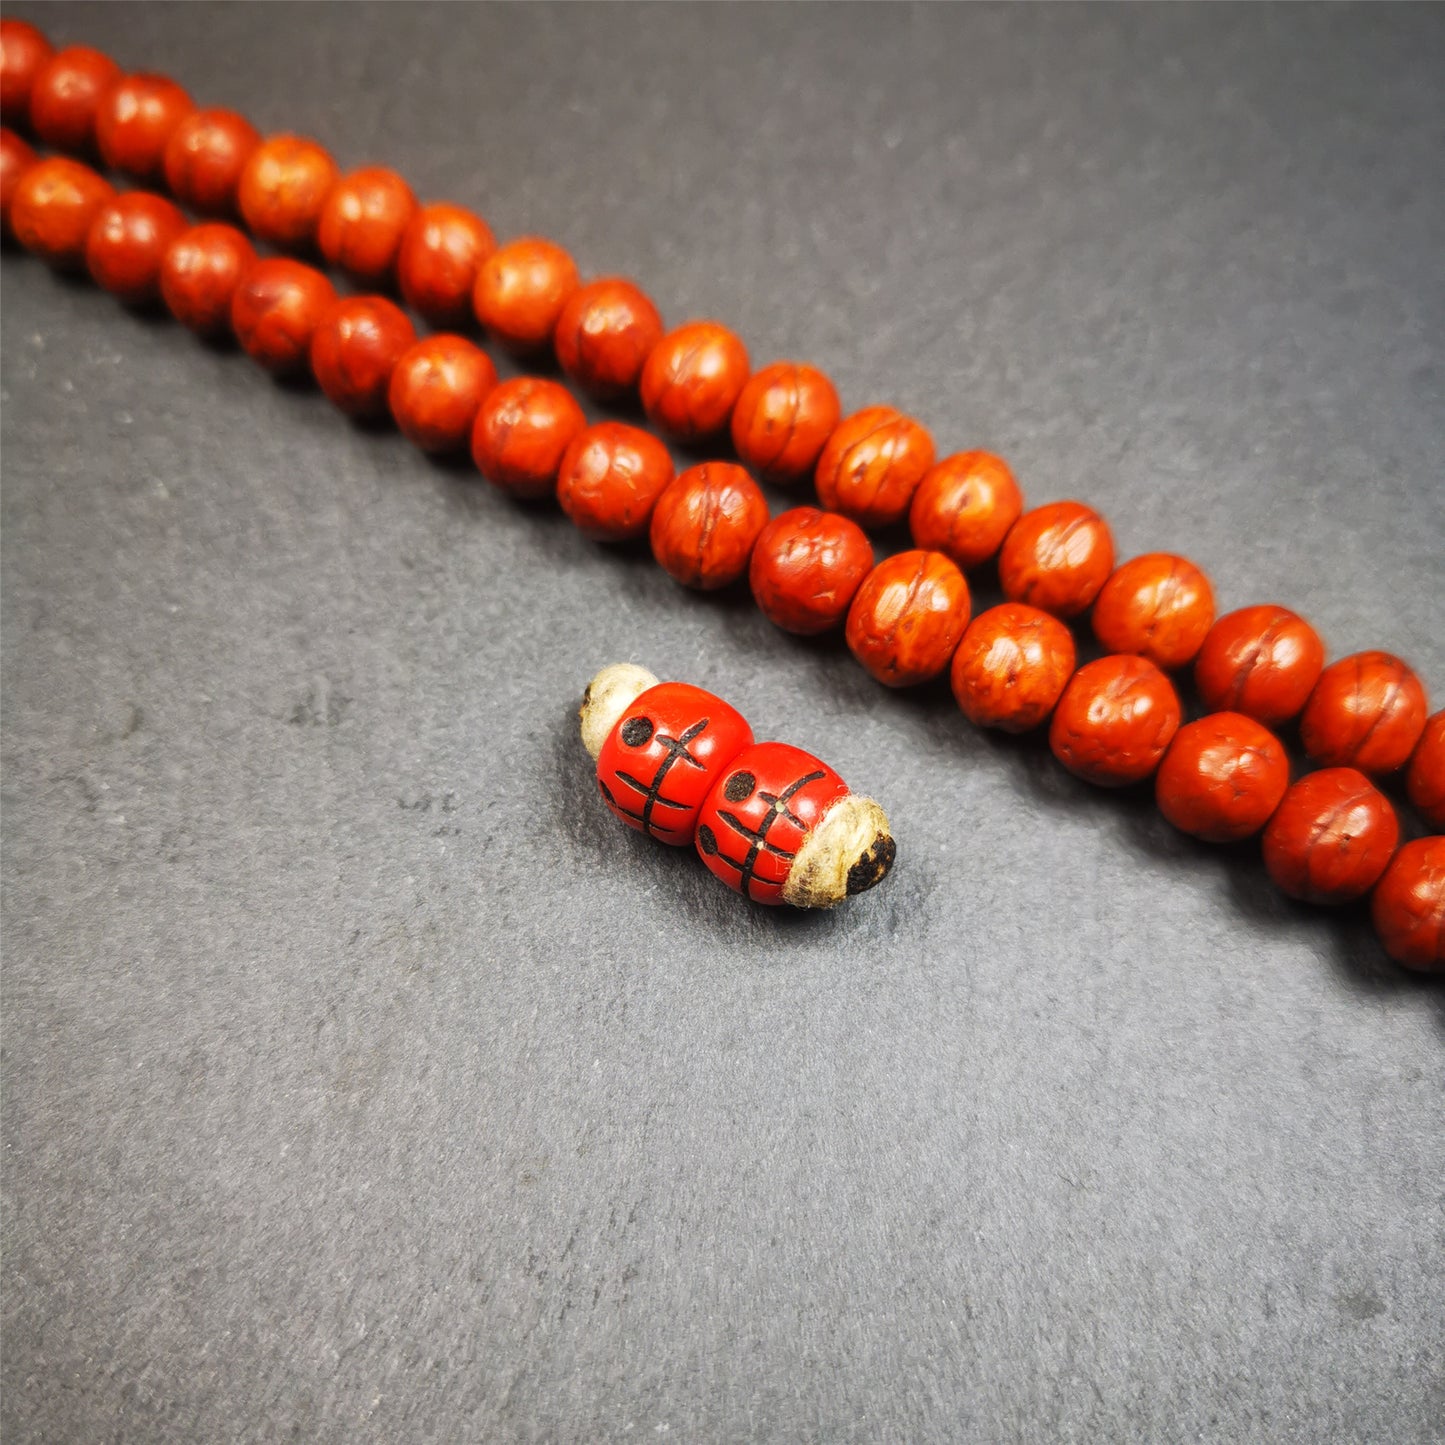 These marker beads were handmade by Tibetan craftsmen and come from Hepo Town, Baiyu County, the birthplace of the famous Tibetan handicrafts. It is made of plastic,carved skull pattern,red color,size is 0.4" × 0.3".